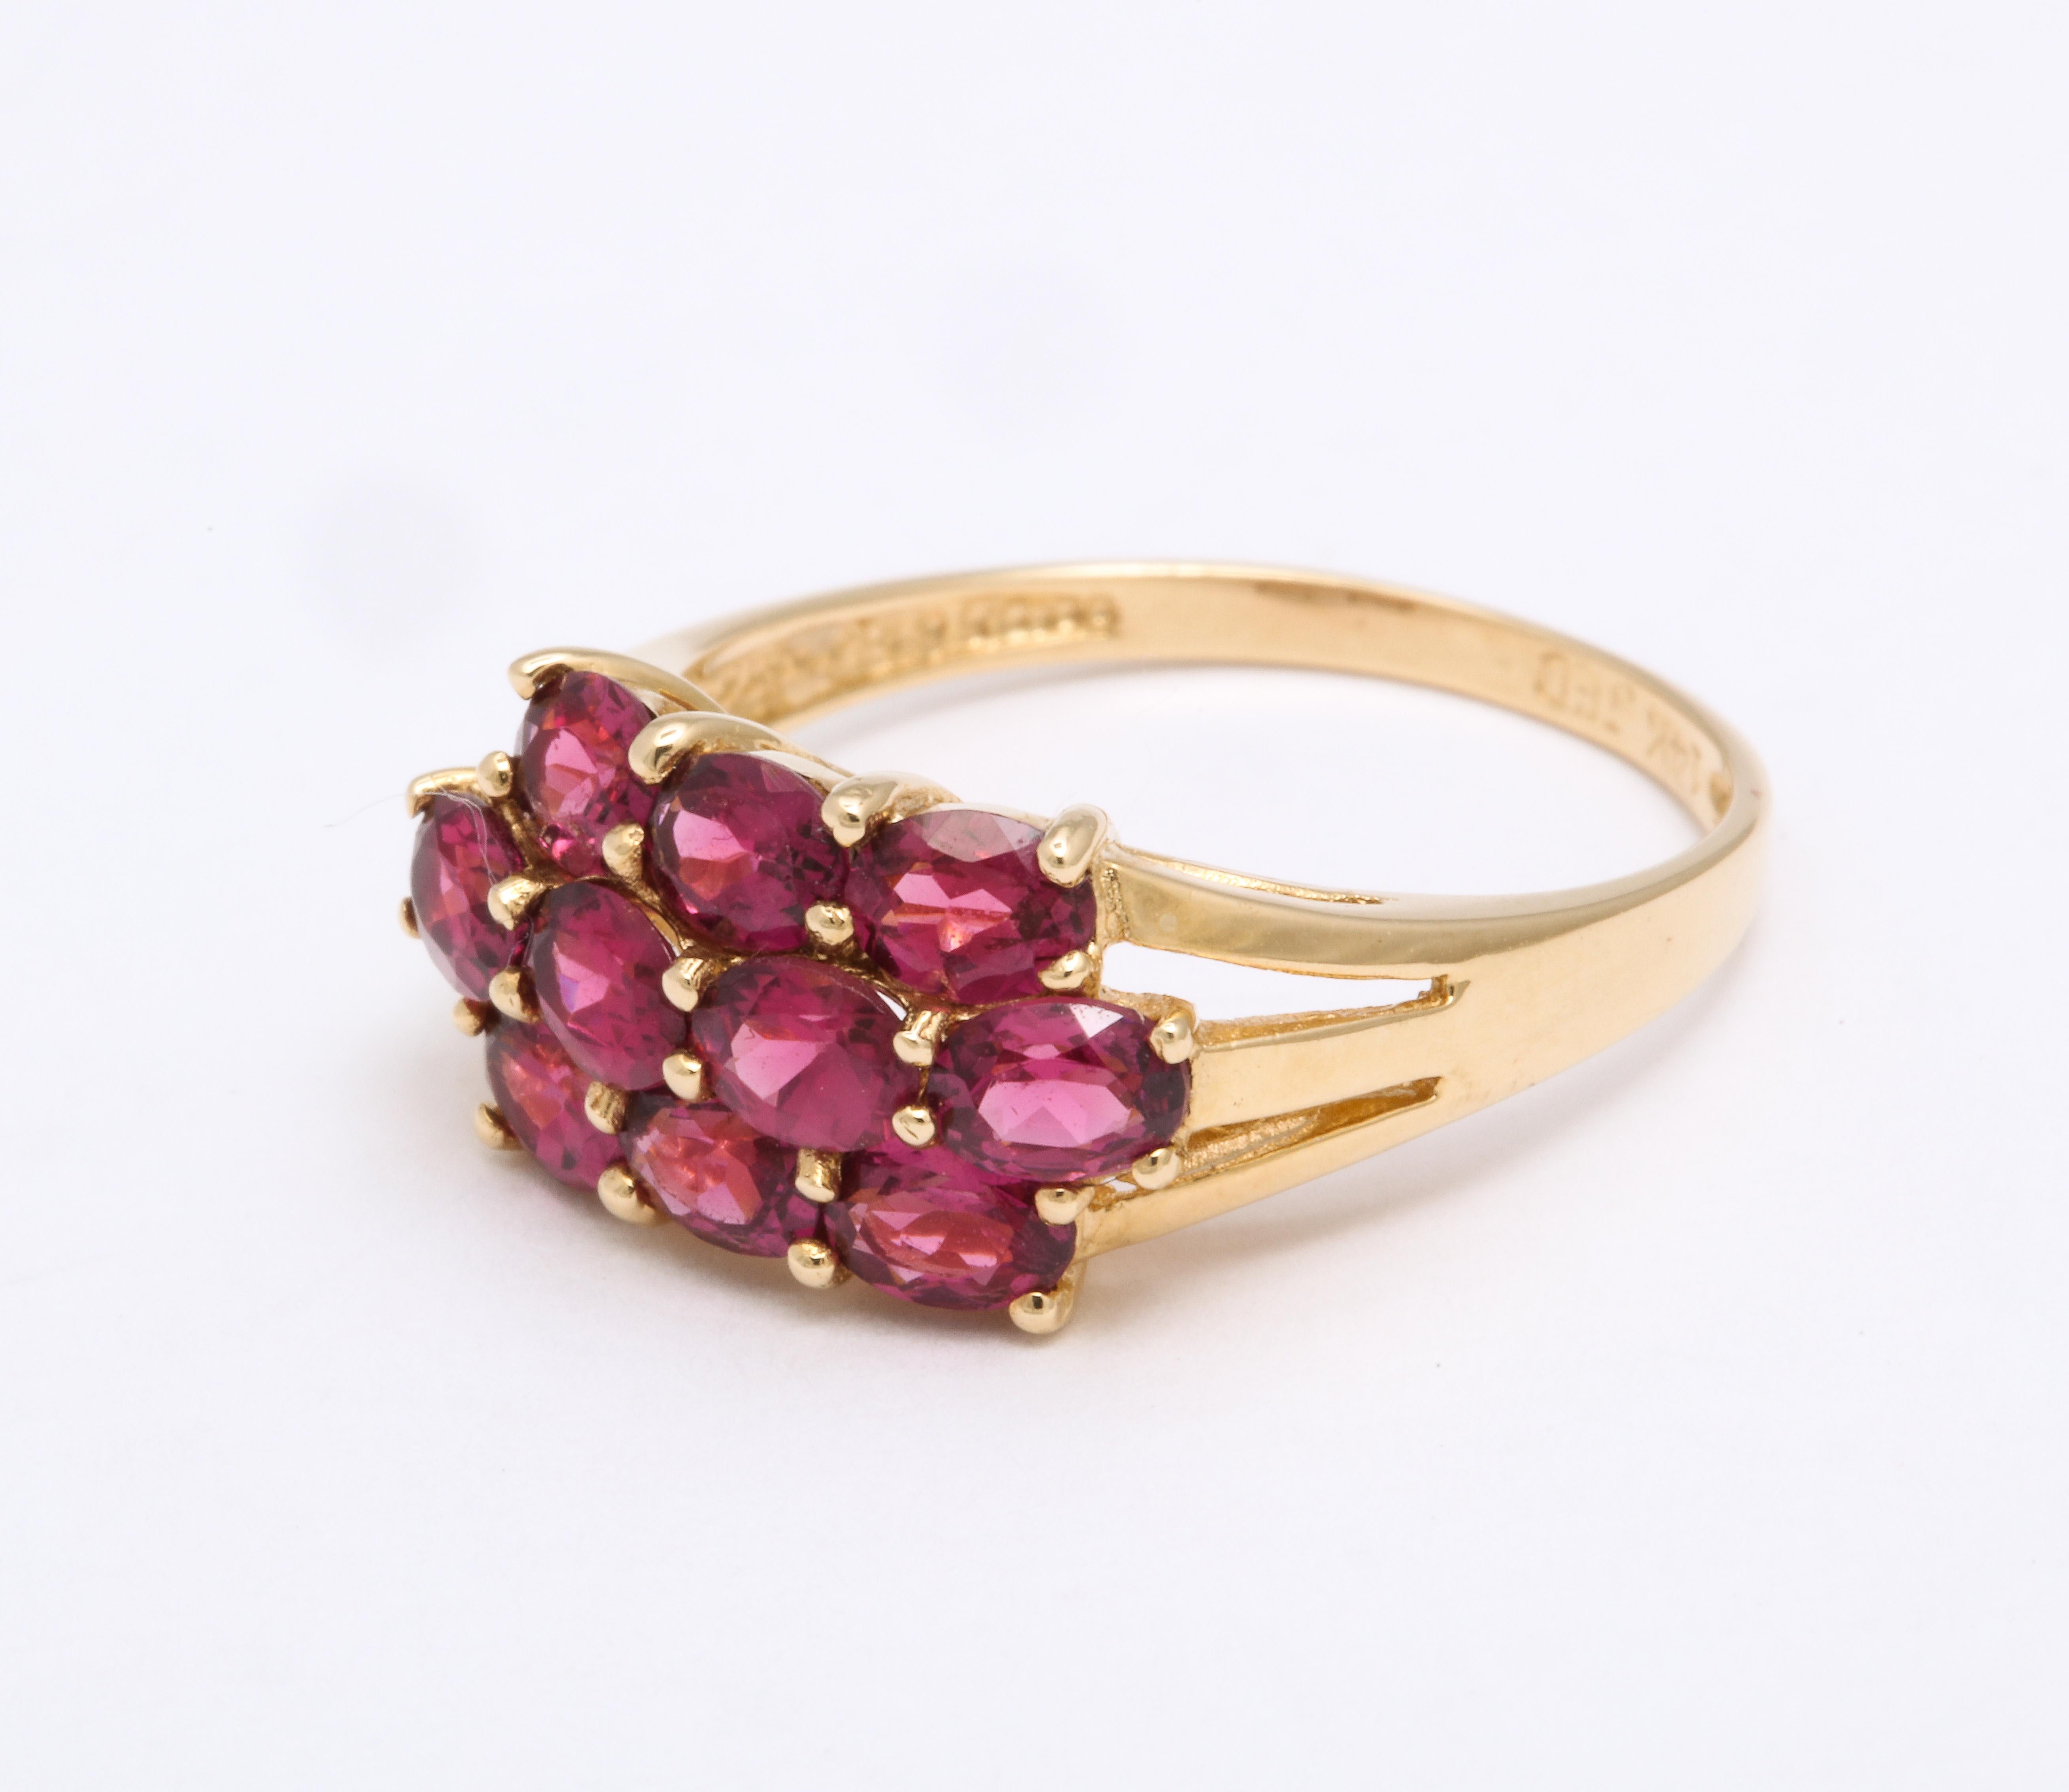 A victorian garnet ring with brilliant, sparkling cherry color and a pink under glow that the pictures do not capture. I consider reshooting the photographs. Made in c.1890, the ring is American made in 14 Kt gold. Garnet was a popular stone in the